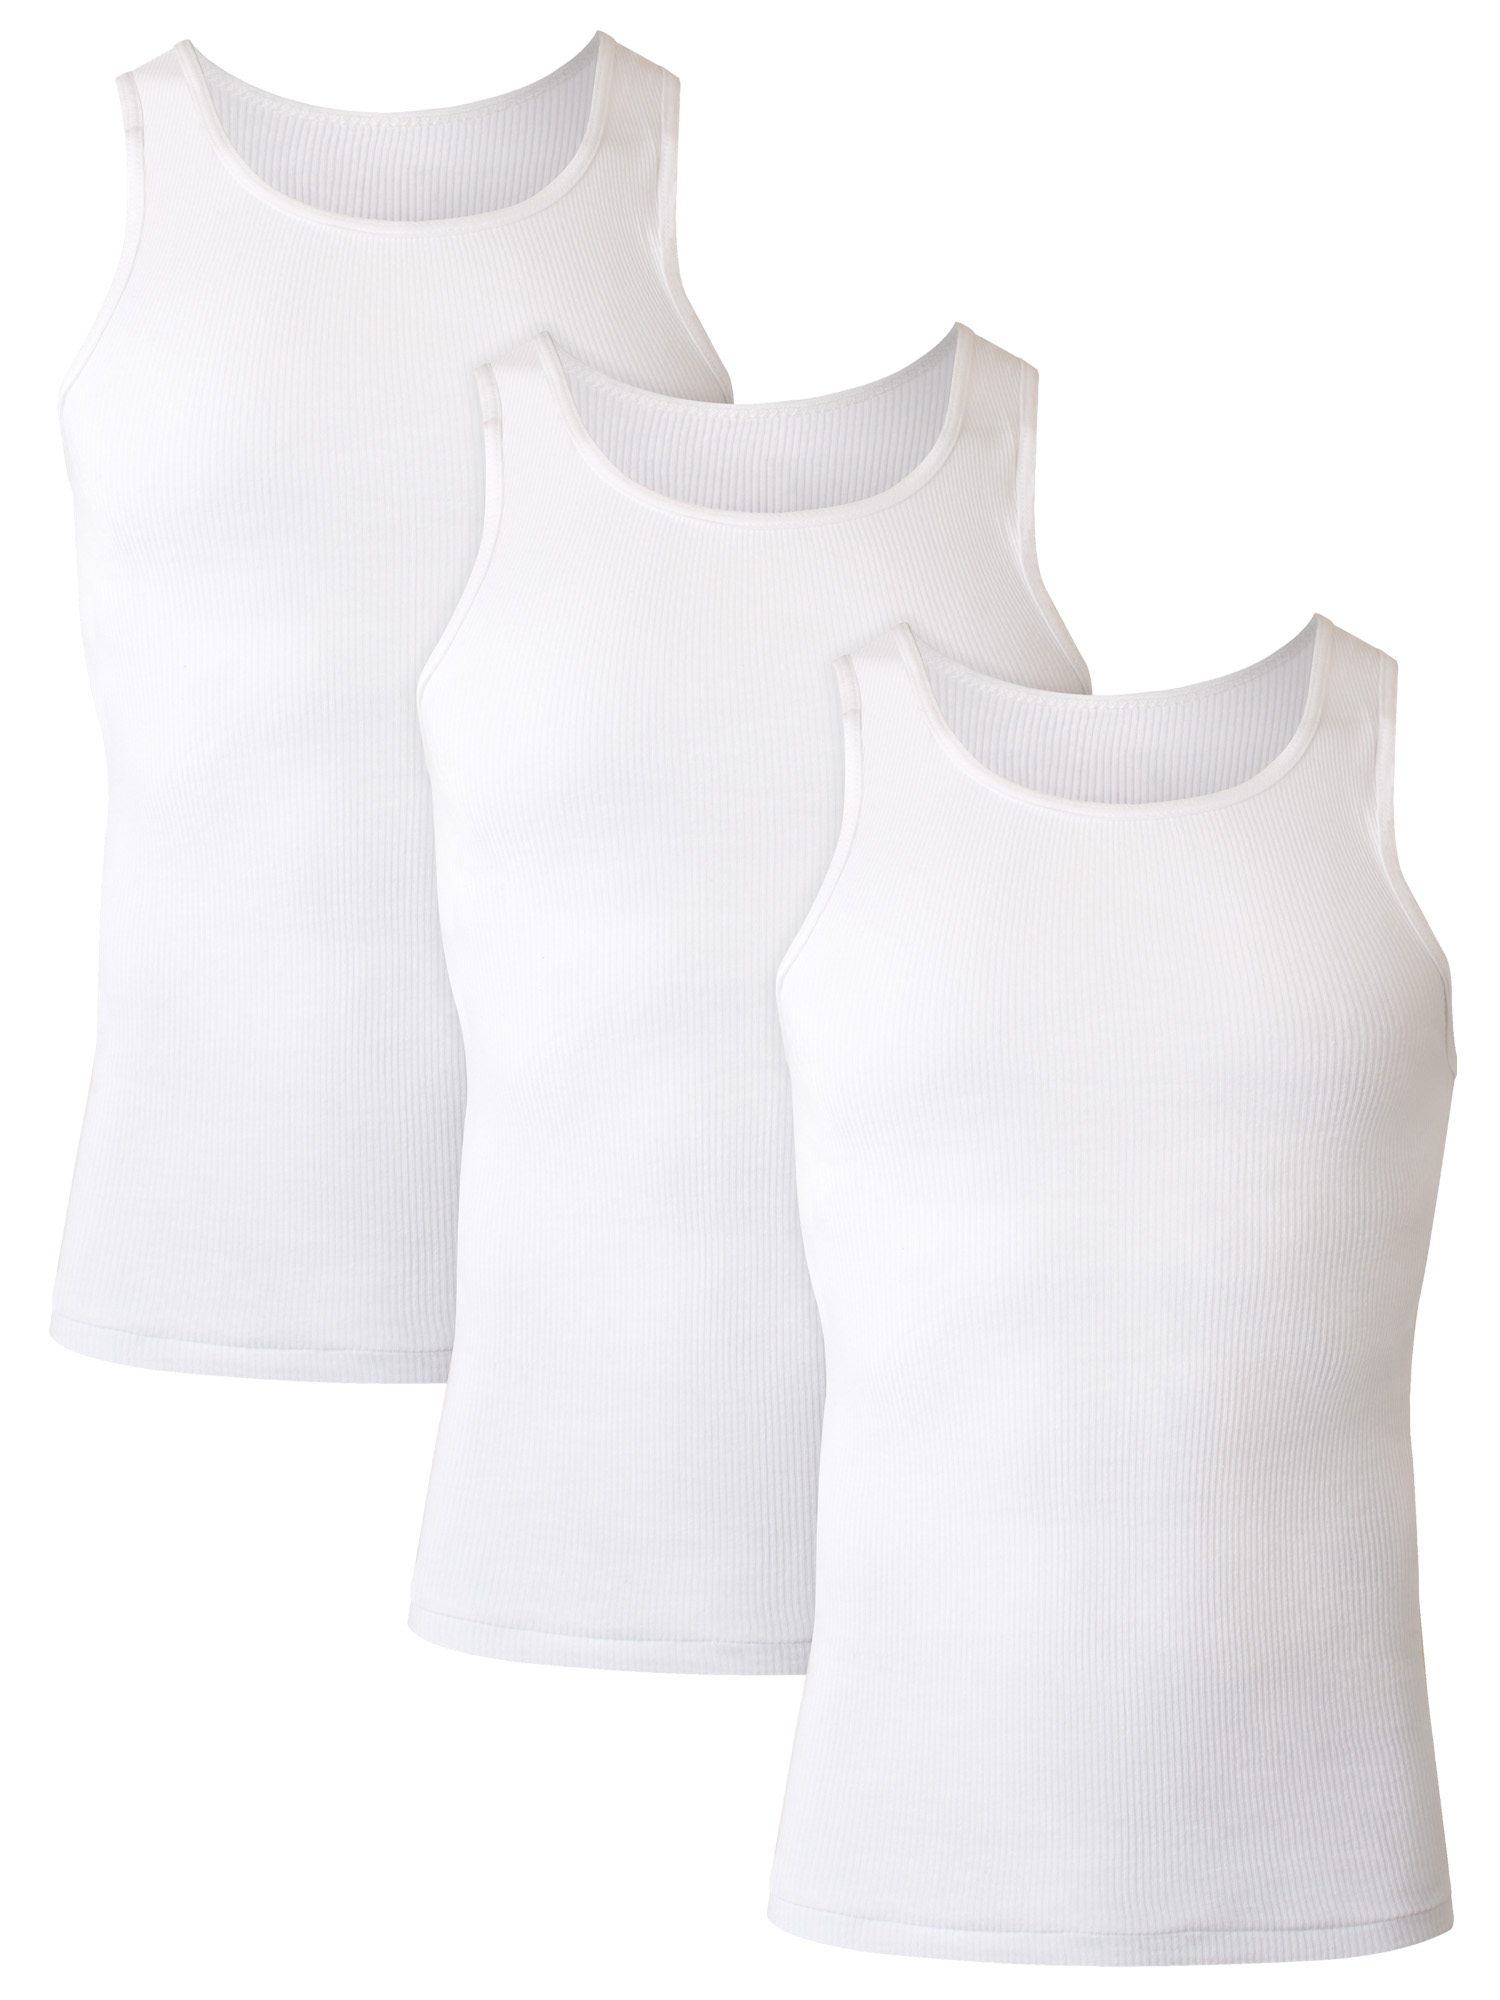 White A-Shirt 3-Pack - image 1 of 9